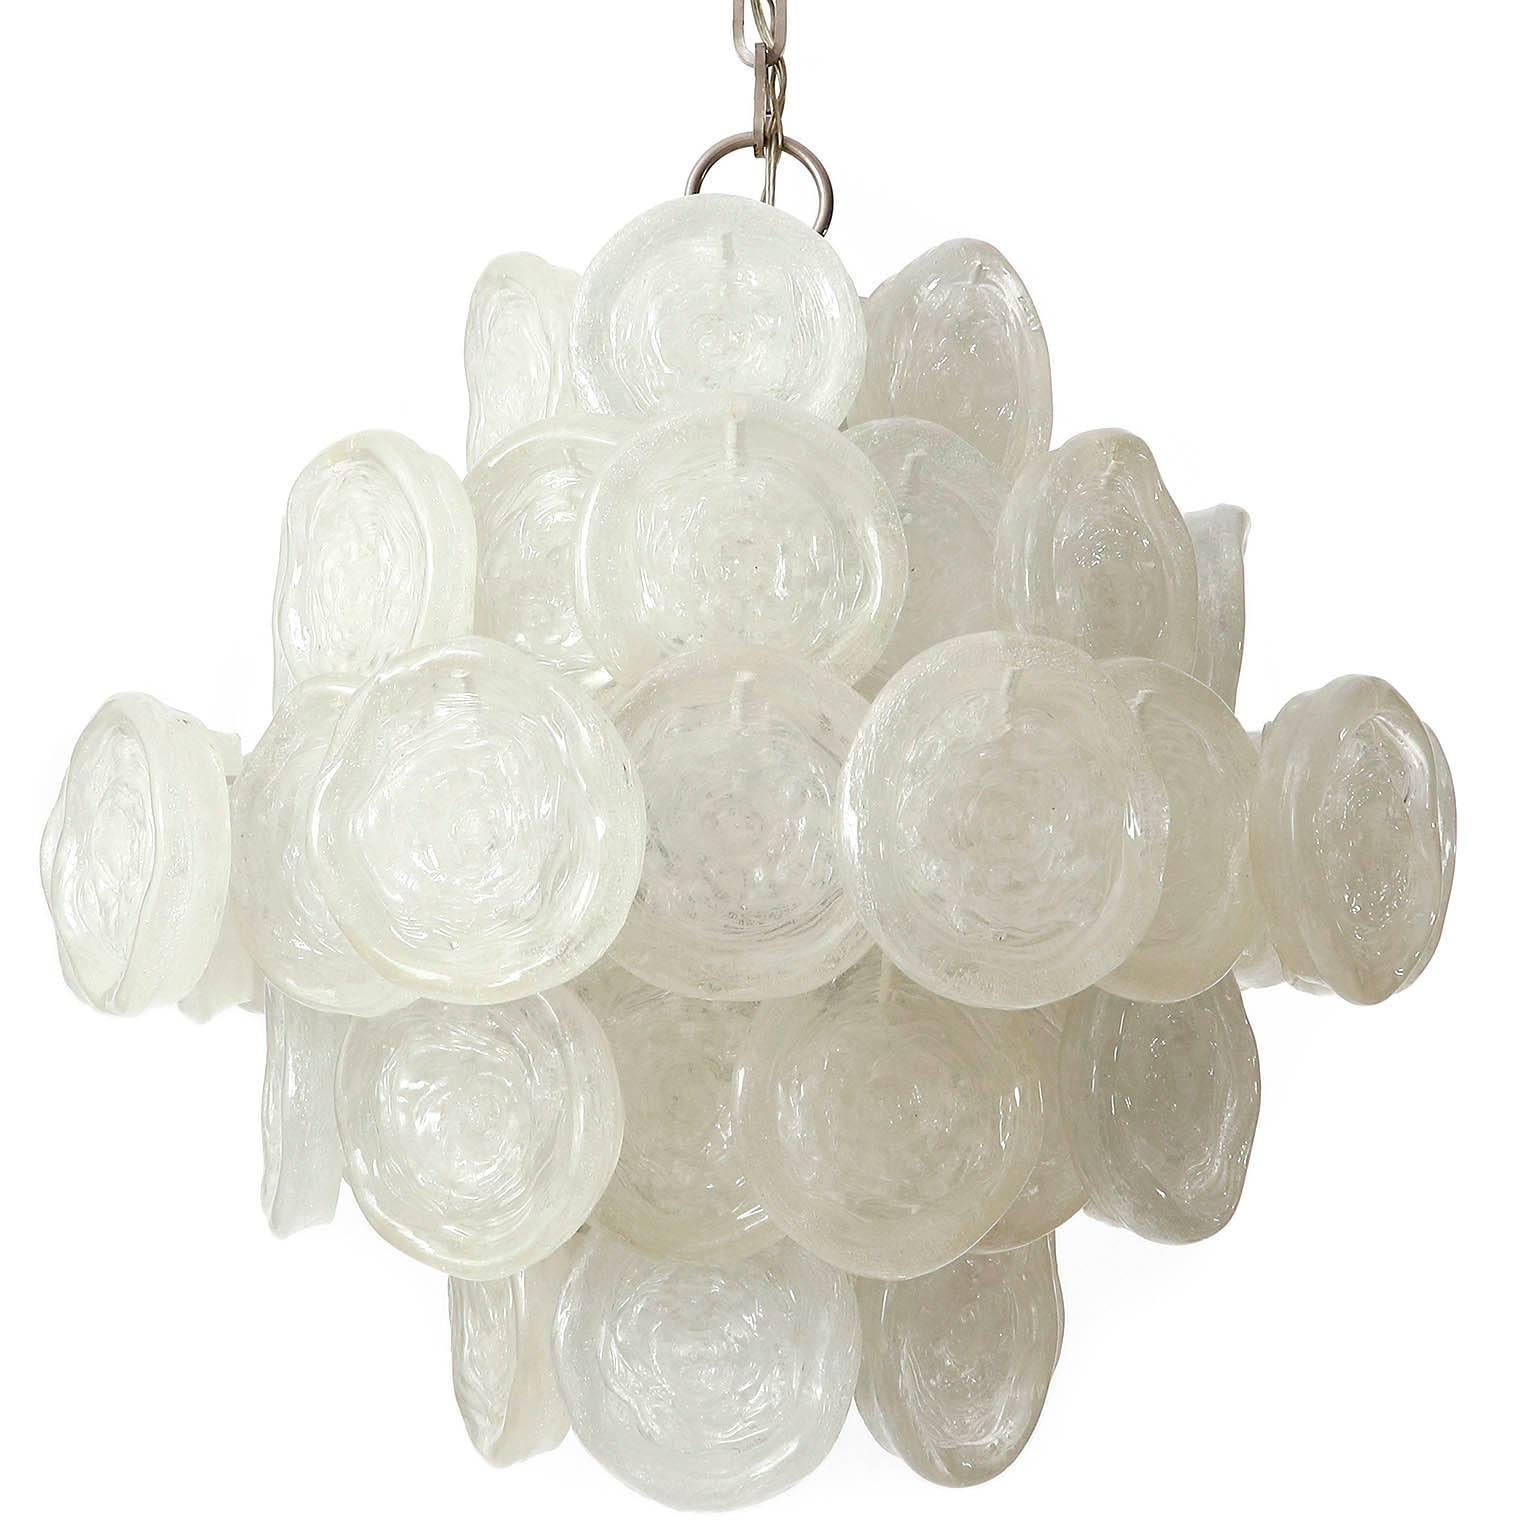 A large and wonderful multi-tiered chandelier in the style of Kalmar, Austria, manufactured in Mid-Century, circa 1970. 
Round discs made of Lucite hanging on a white lacquered metal frame. The layered Lucite elements create a wonderful light. Chain